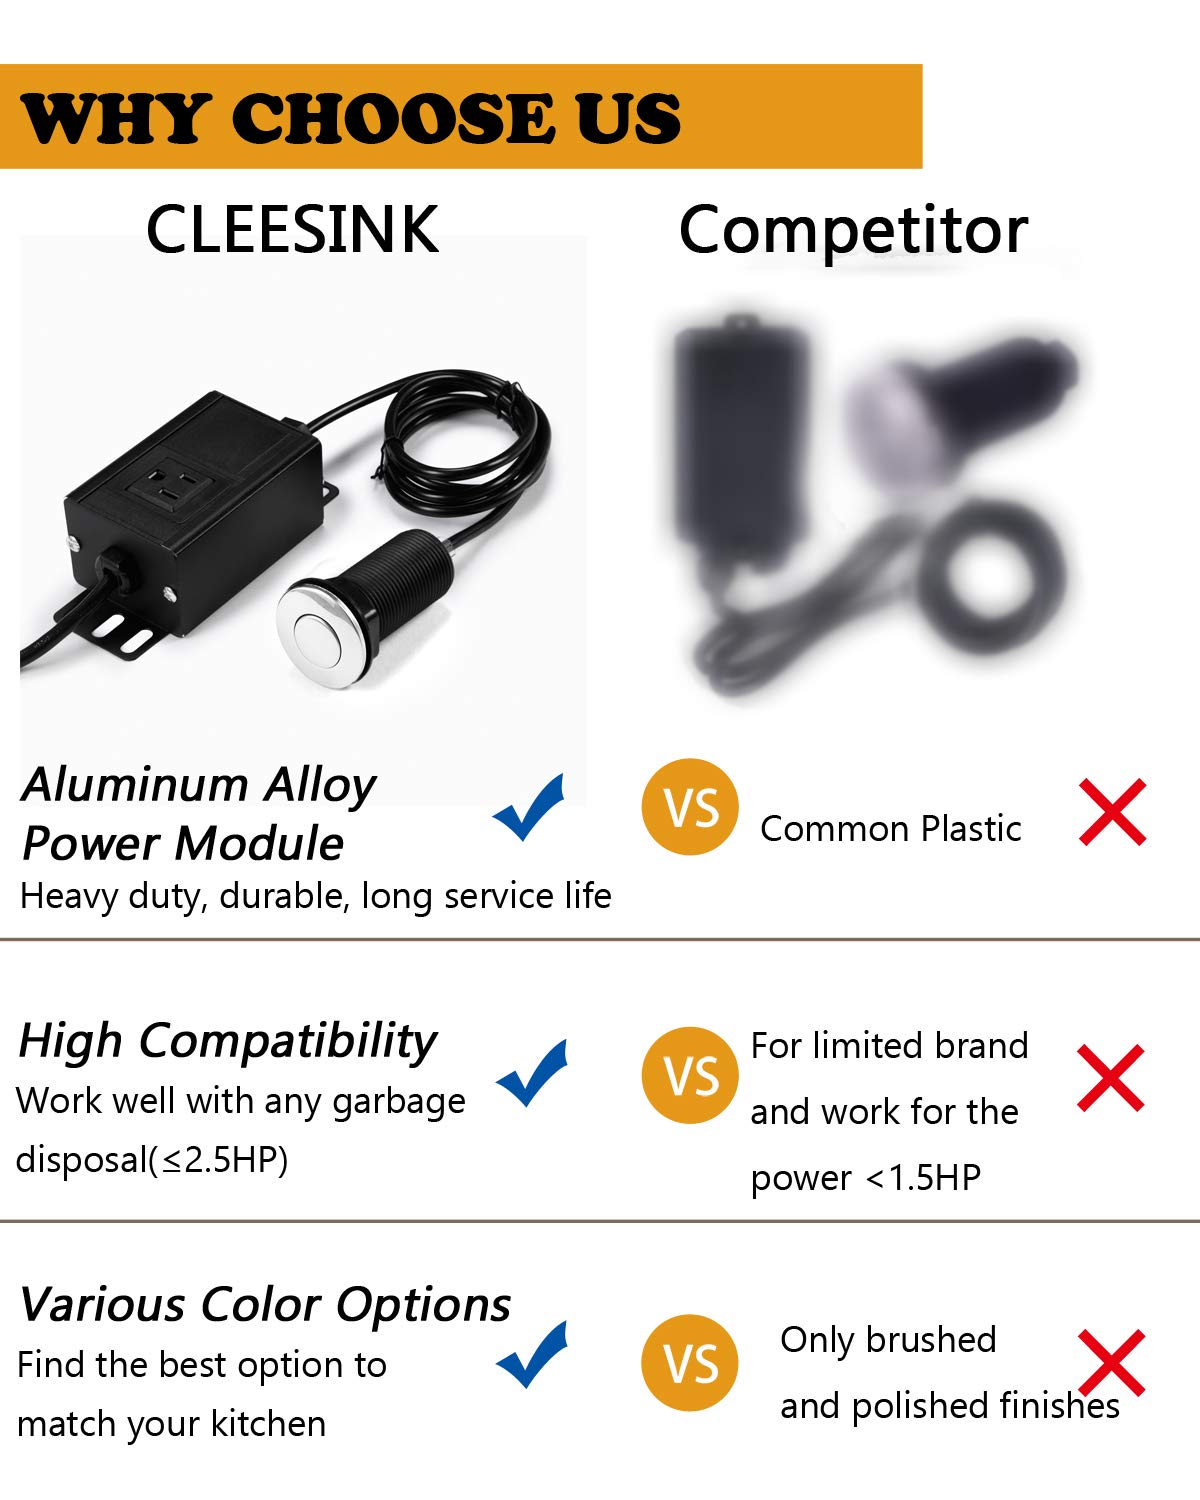 Garbage Disposal Air Switch Kit, Sink Top Waste Disposer On/Off Switch with Aluminum Alloy Power Module (LONG POLISHED STAINLESS STEEL BUTTON) by CLEESINK